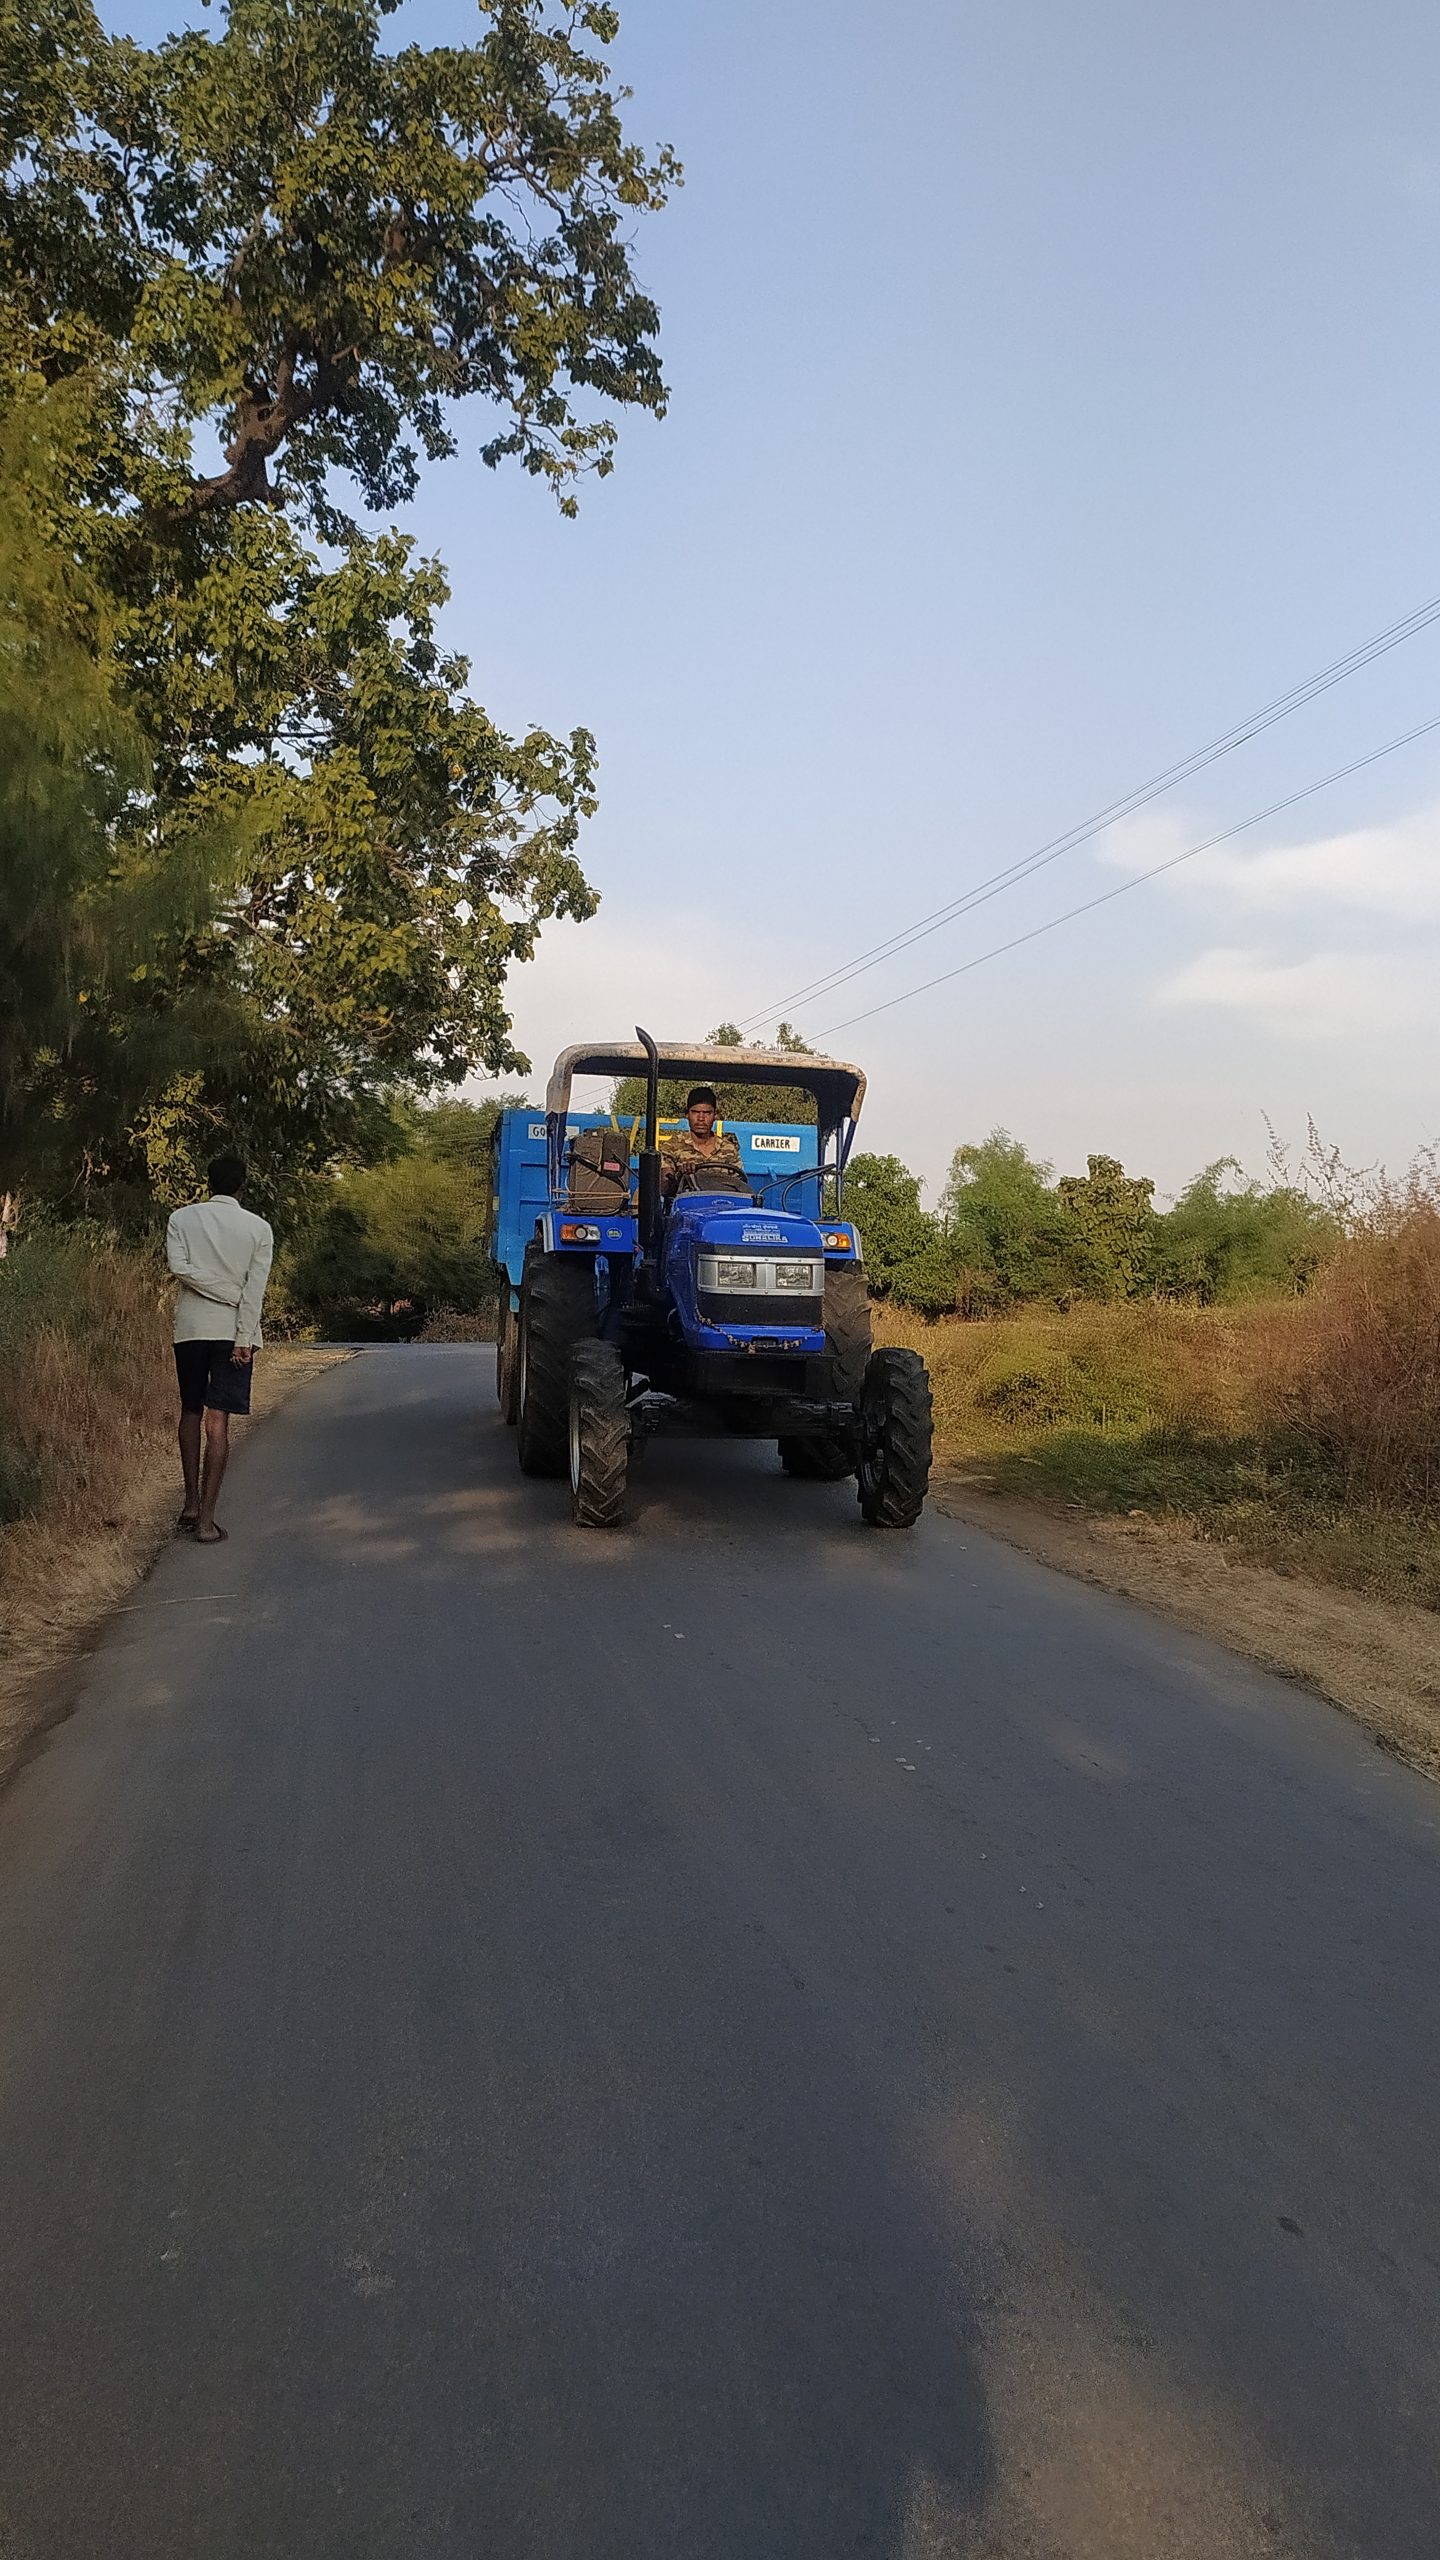 A tractor on a road